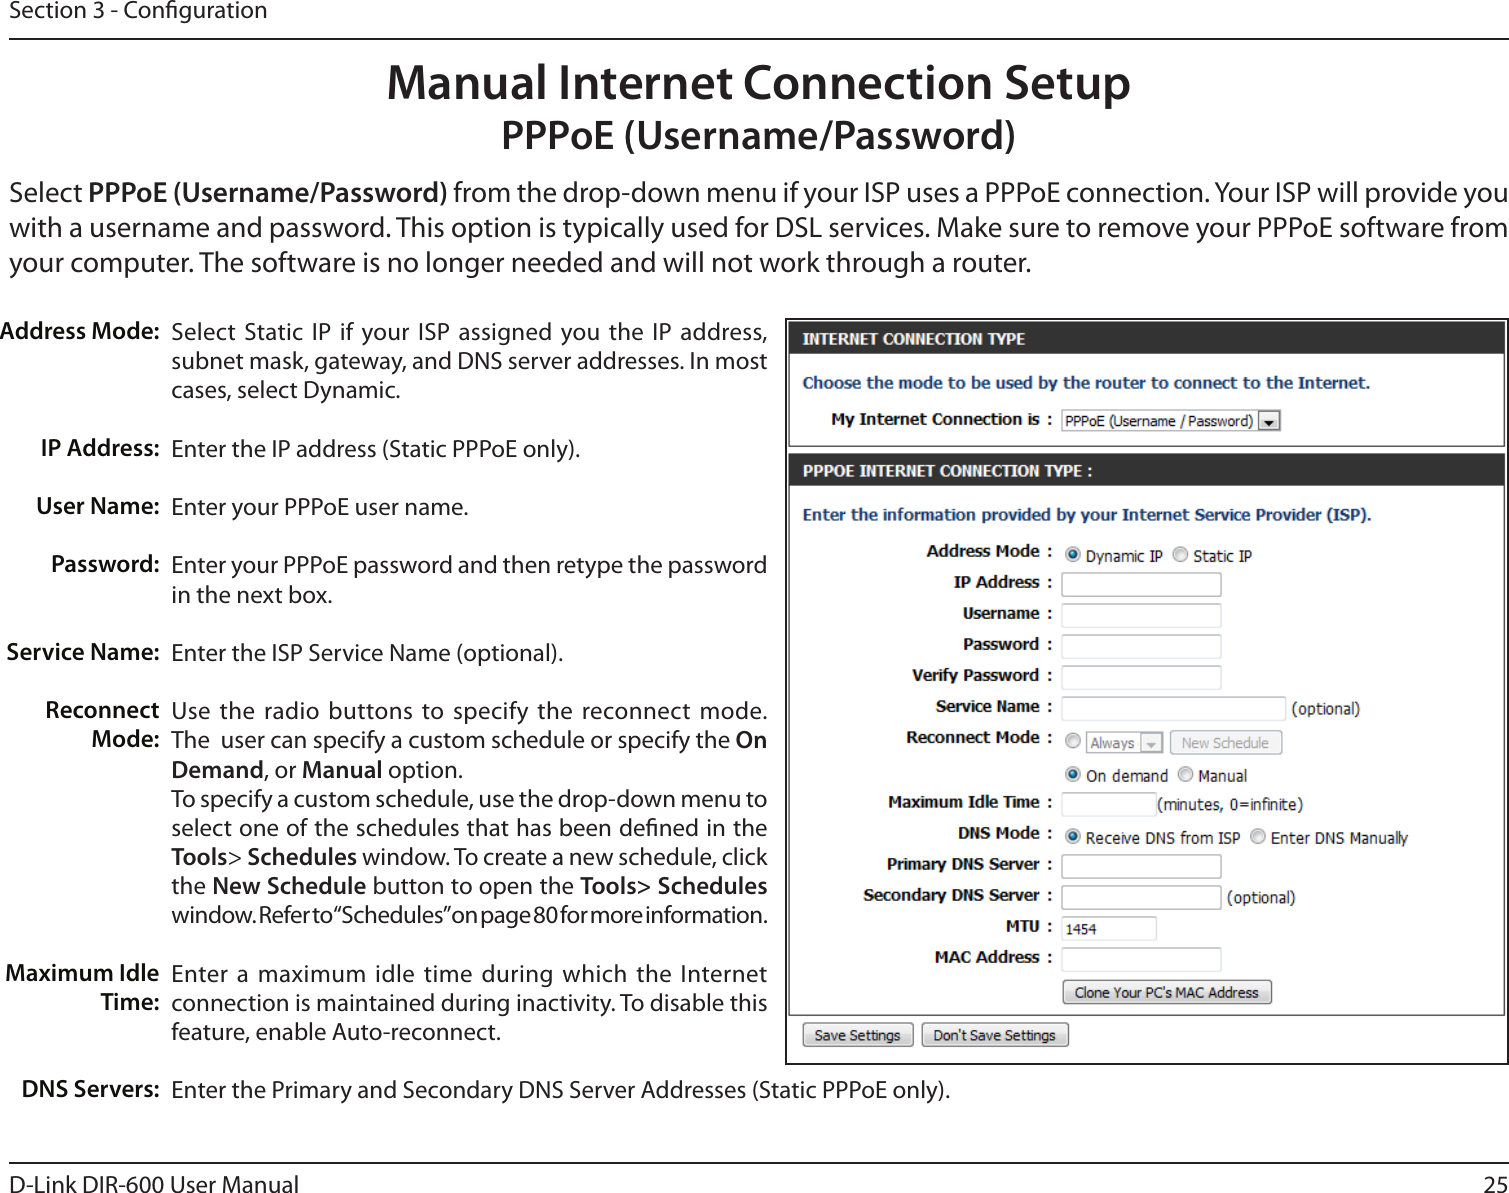 25D-Link DIR-600 User ManualSection 3 - CongurationSelect  Static IP  if your ISP assigned you the IP  address, subnet mask, gateway, and DNS server addresses. In most cases, select Dynamic.Enter the IP address (Static PPPoE only).Enter your PPPoE user name.Enter your PPPoE password and then retype the password in the next box.Enter the ISP Service Name (optional).Use the radio buttons to specify the  reconnect mode. The  user can specify a custom schedule or specify the On Demand, or Manual option.To specify a custom schedule, use the drop-down menu to select one of the schedules that has been dened in the Tools&gt; Schedules window. To create a new schedule, click the New Schedule button to open the Tools&gt; Schedules window. Refer to “Schedules” on page 80 for more information.Enter a maximum  idle time during  which the  Internet connection is maintained during inactivity. To disable this feature, enable Auto-reconnect.Enter the Primary and Secondary DNS Server Addresses (Static PPPoE only).Address Mode:IP Address:User Name:Password:Service Name:Reconnect Mode:Maximum Idle Time:DNS Servers:Manual Internet Connection SetupPPPoE (Username/Password)Select PPPoE (Username/Password) from the drop-down menu if your ISP uses a PPPoE connection. Your ISP will provide you with a username and password. This option is typically used for DSL services. Make sure to remove your PPPoE software from your computer. The software is no longer needed and will not work through a router.